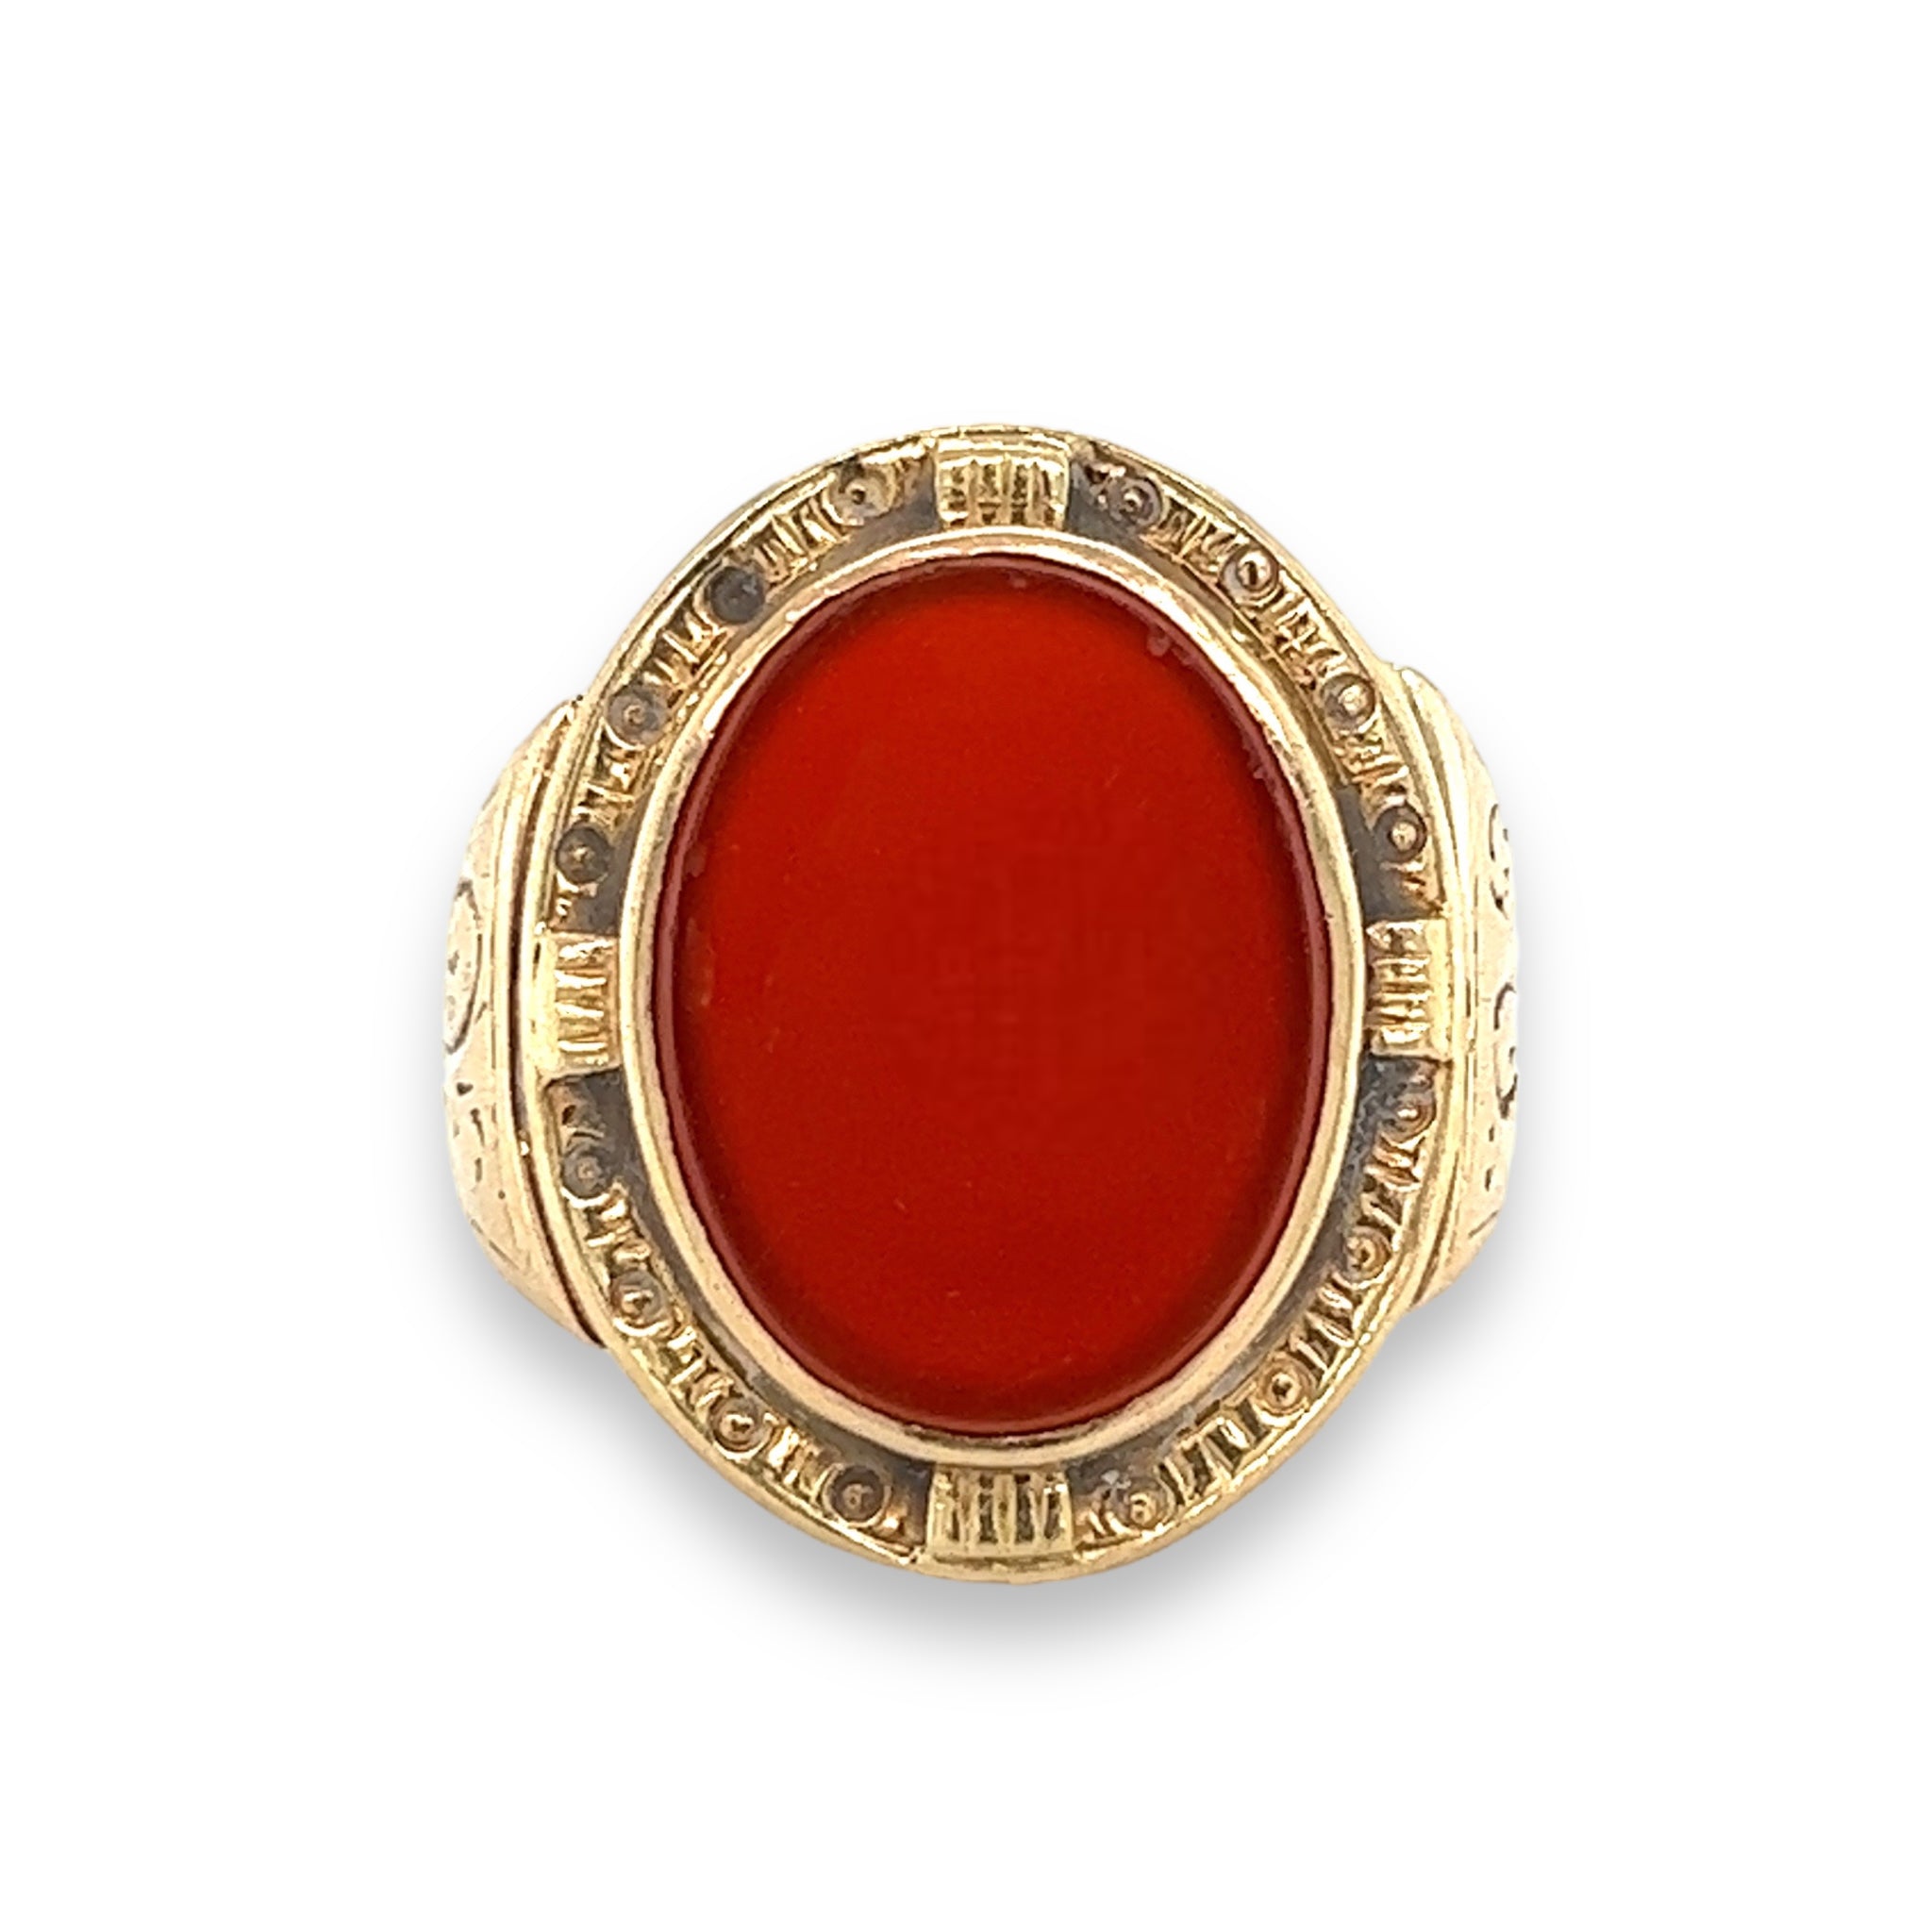 Sold at Auction: Burmese Red Jade and 925 Sterling Silver Ring